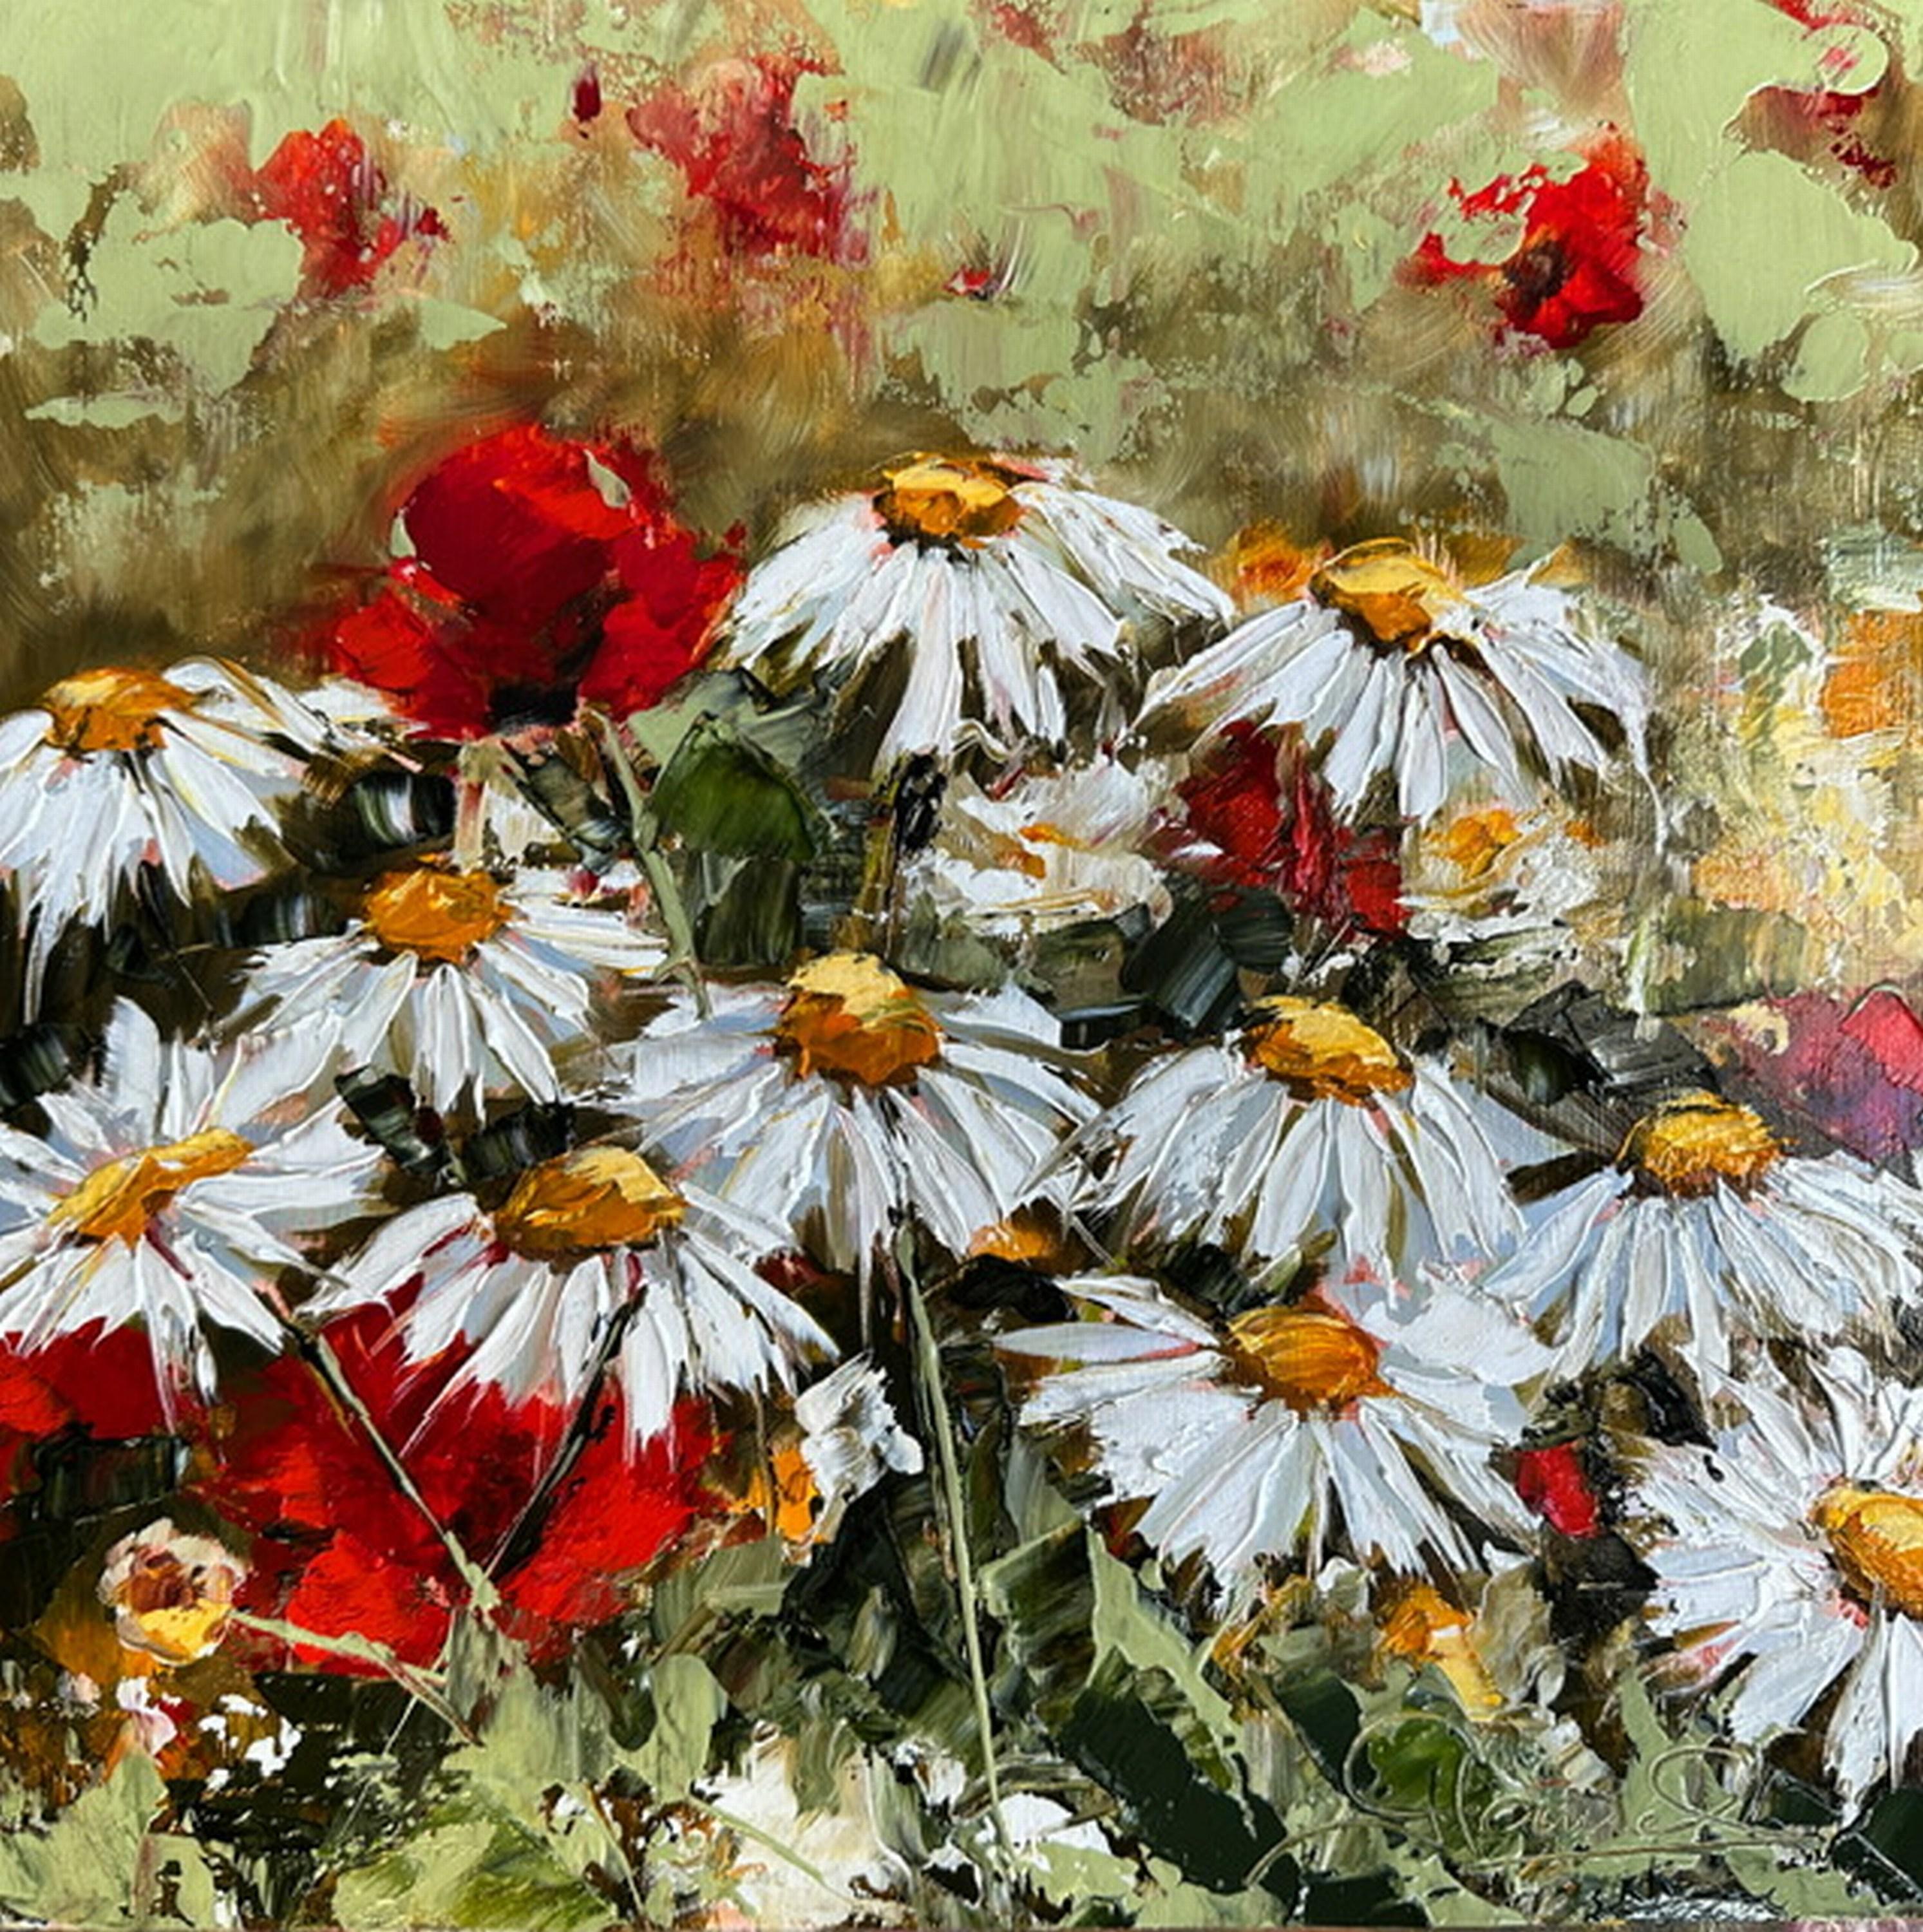 Genevieve Hamel
Together
Oil on Wood Panel
Year: 2024
Size: 12 x 12 x 1.625 inches
Signed by hand
COA provided
Ref.: 924802-2098

So harmonious, this combination of daisies & red poppies is just a delight! The thick impasto of the daisies’ petals